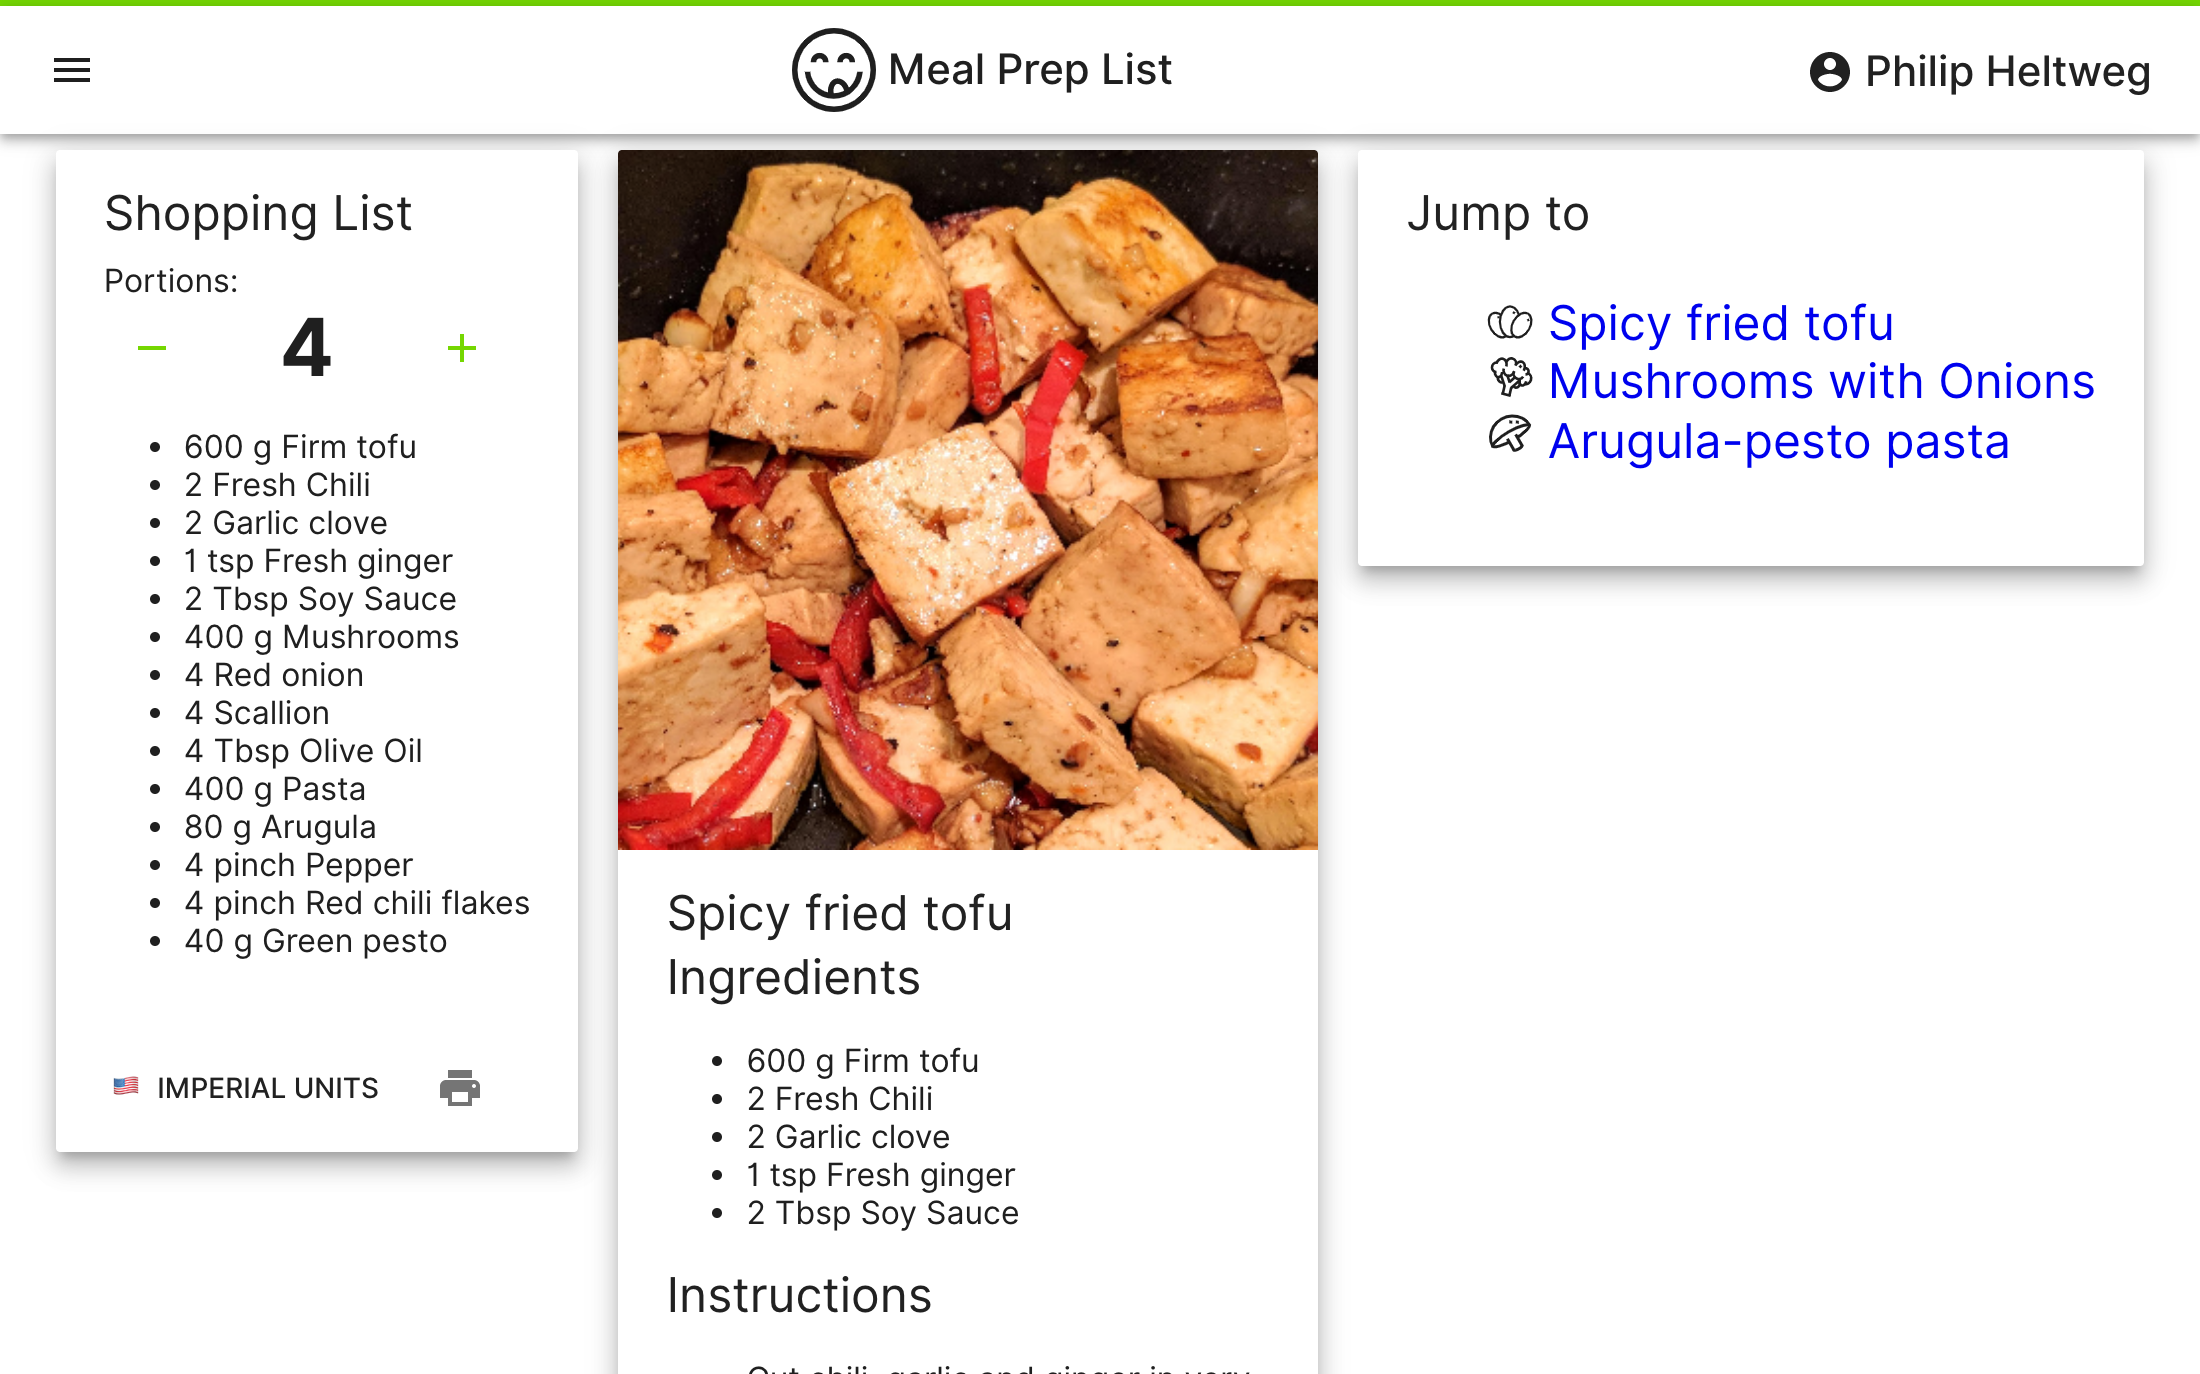 Displaying all selected recipes in one overview